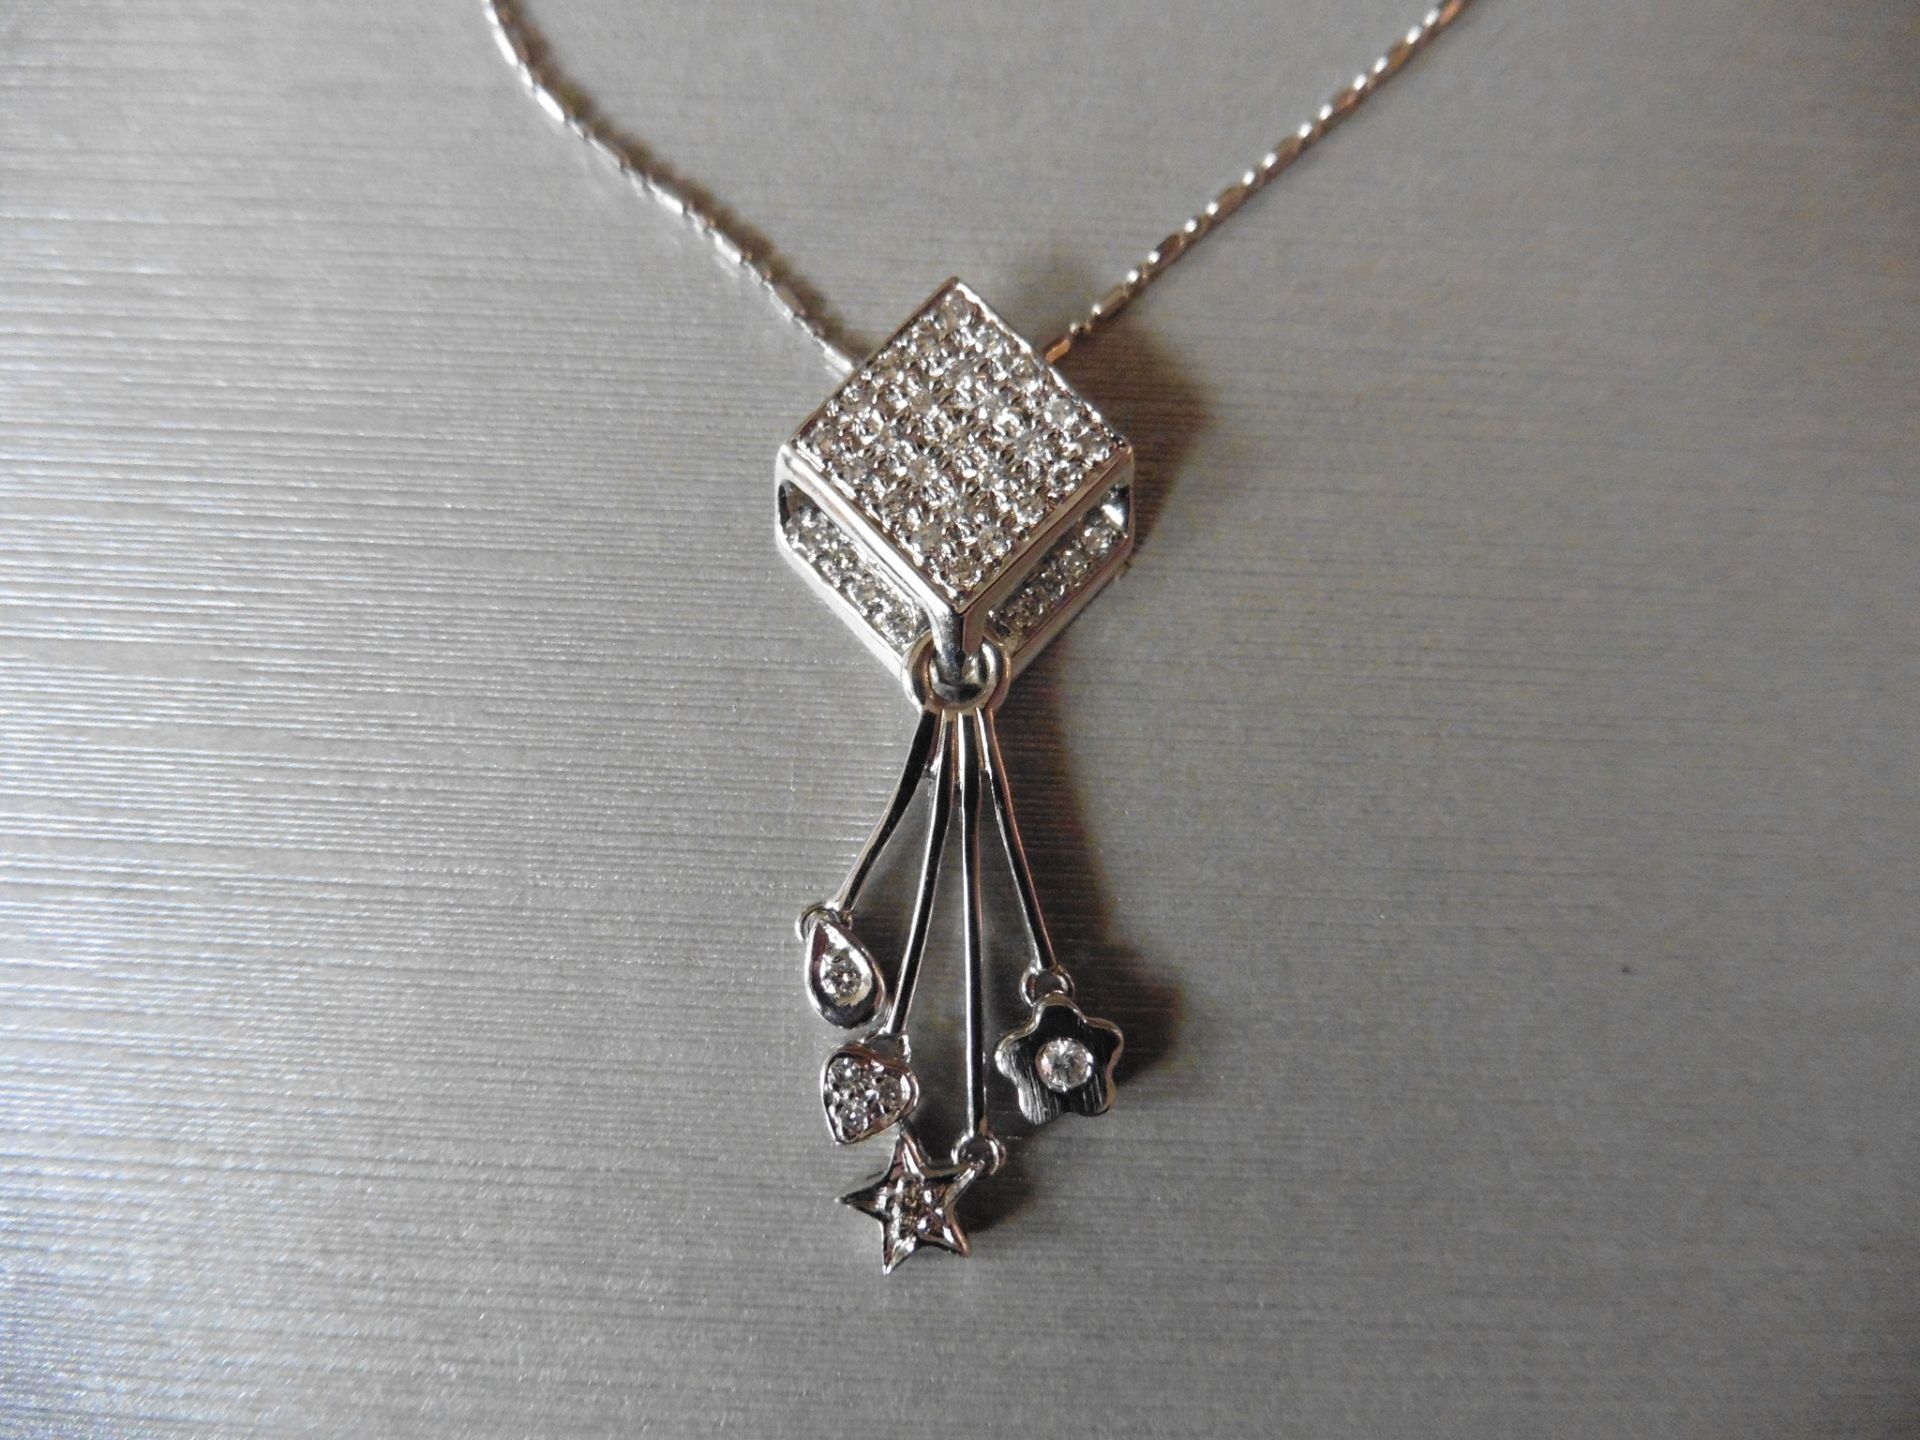 18ct white gold fancy drop pendant. Diamond shaped design at the top which is micro set with tiny